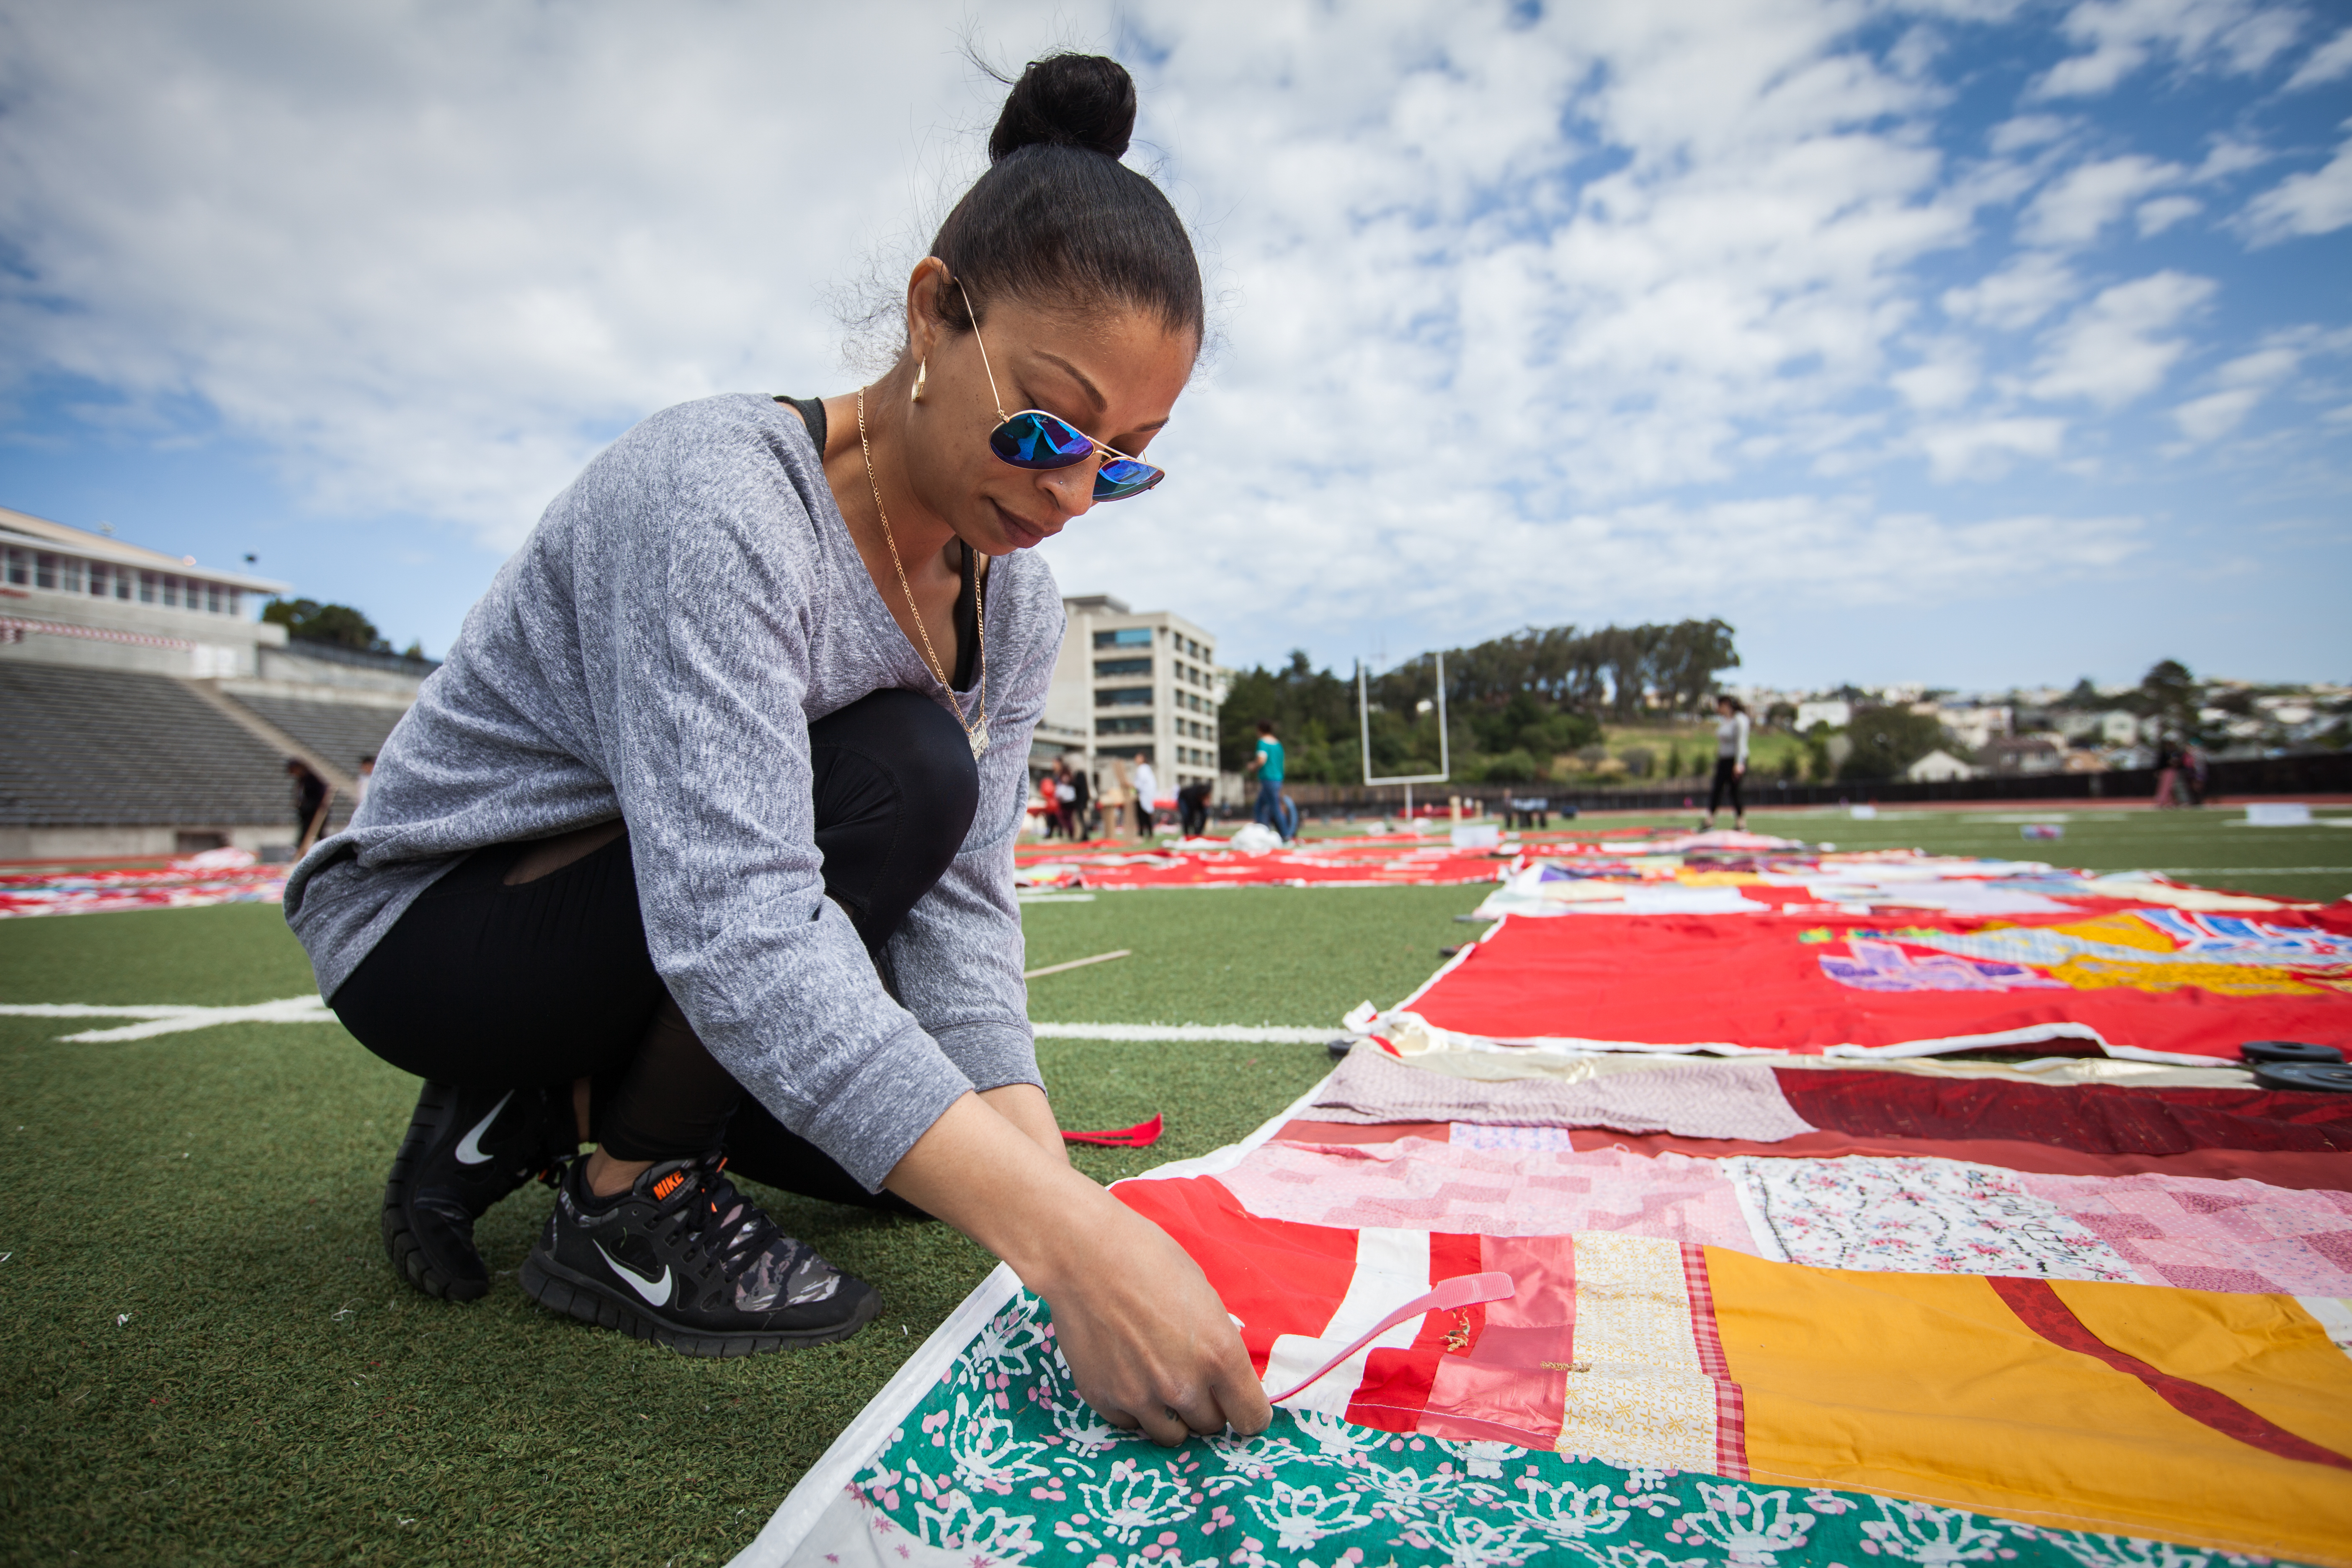 A volunteer, Alexis Ortiz, City College of San Francisco Women’s Studies student helps set up during the installation of The Monument Quilt on the football field of George M. Rush Stadium at City College of San Francisco Ocean Campus on Saturday, May 6, 2017. (Photo by Ekevara Kitpowsong)